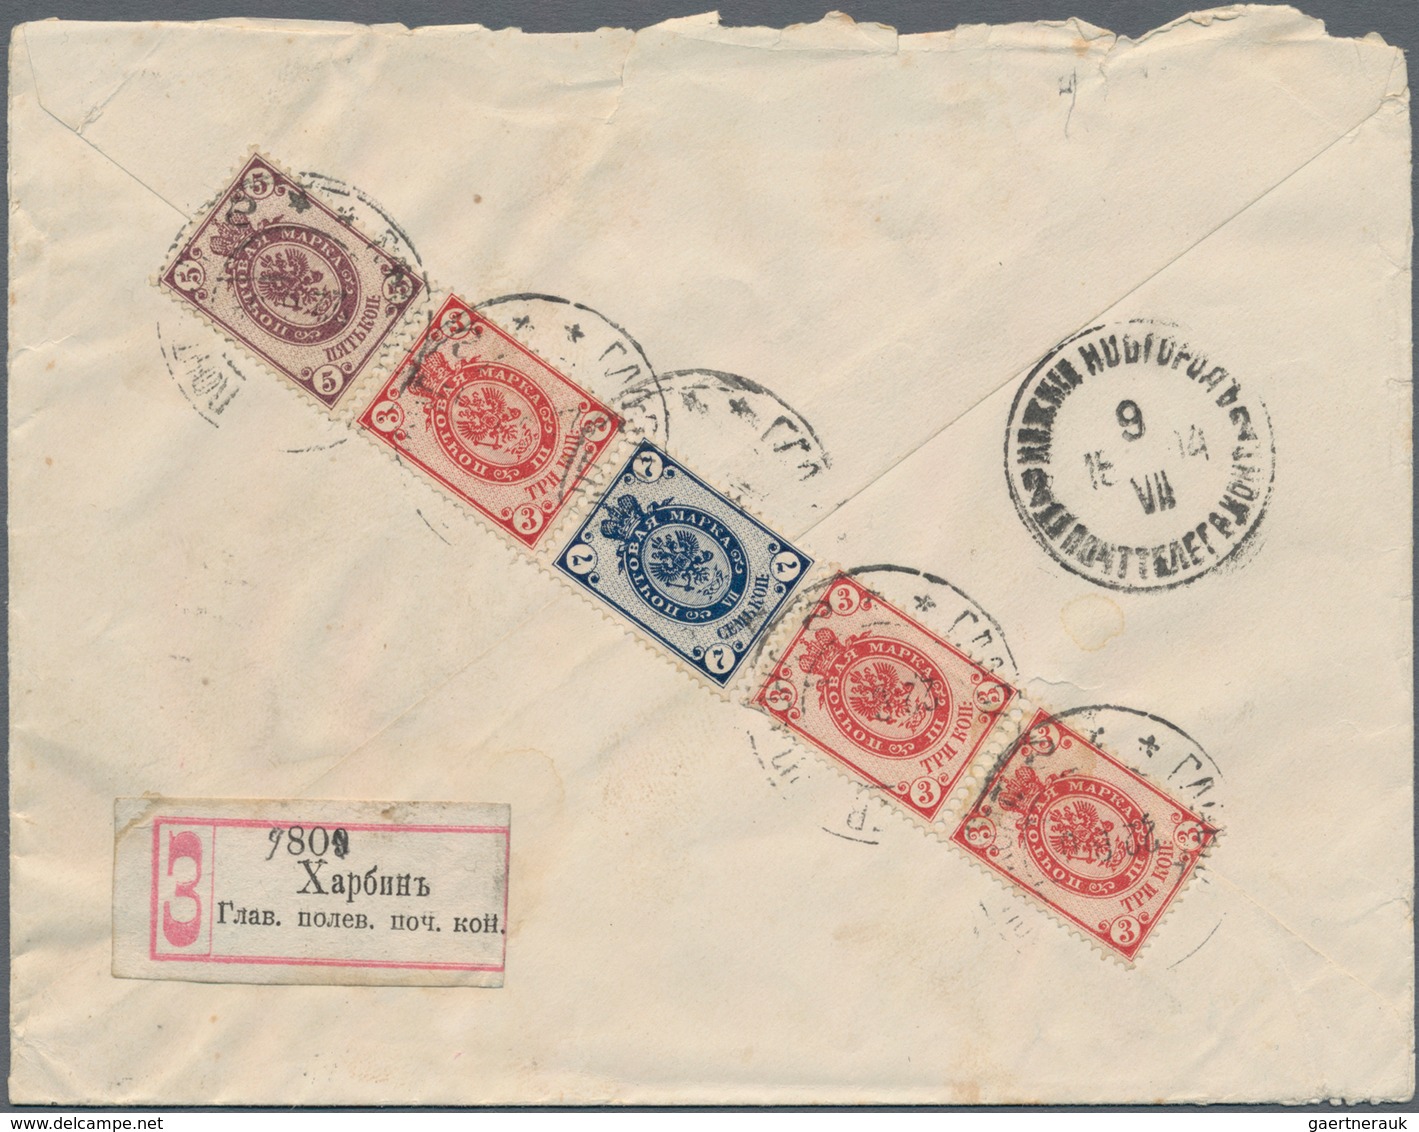 Russische Post In China: 22.06.1904 Russo-Japanese War Registered Cover Franked With 3x 3 Kop. Red, - China